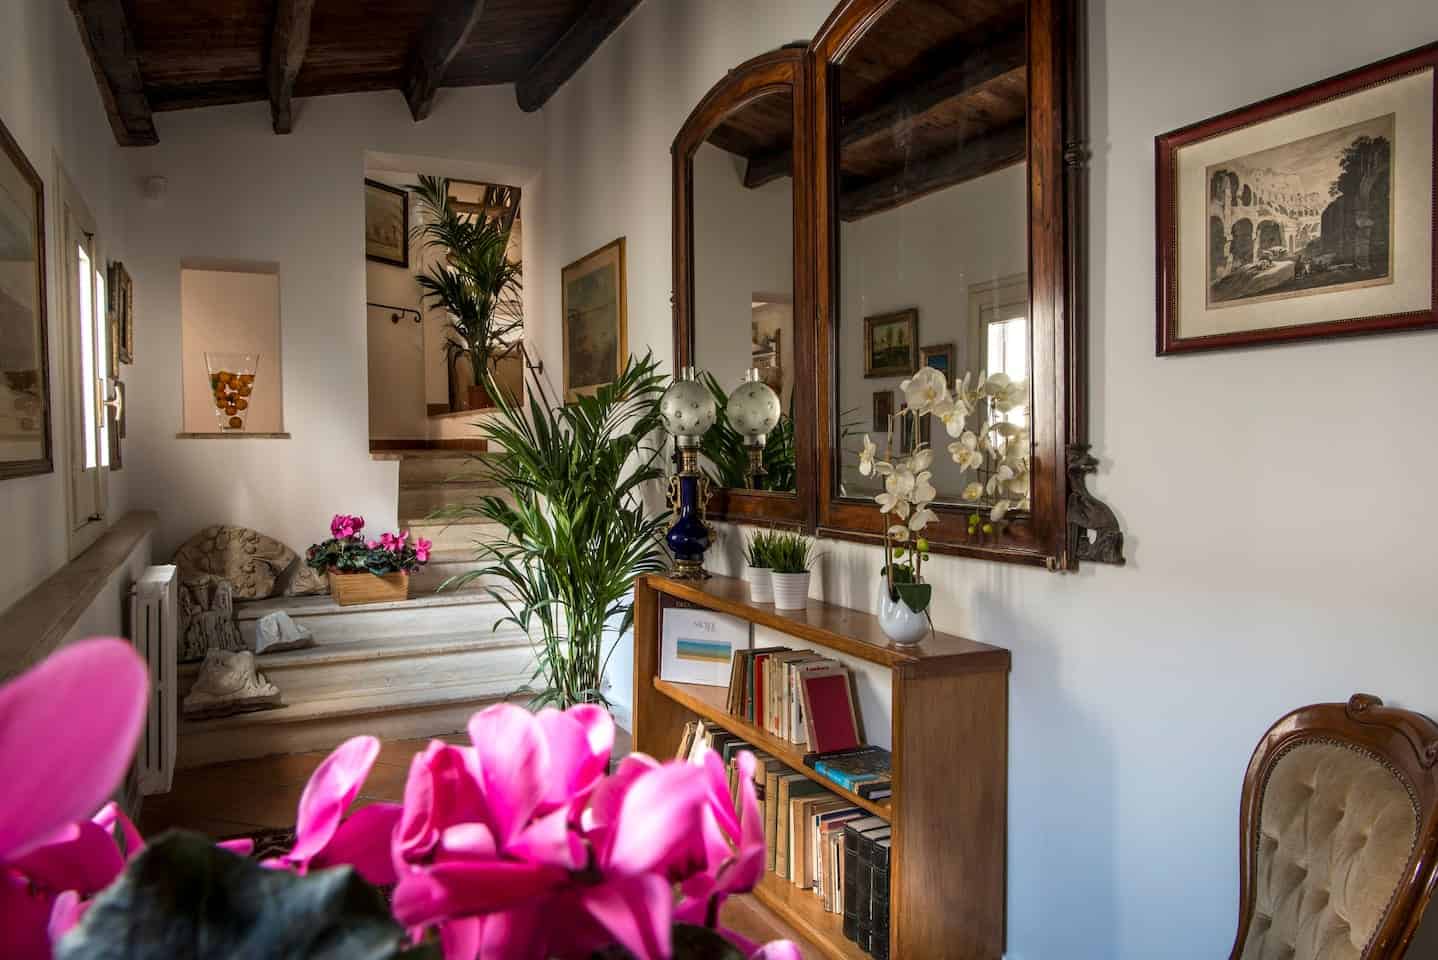 Image of Airbnb rental in Palermo, Italy